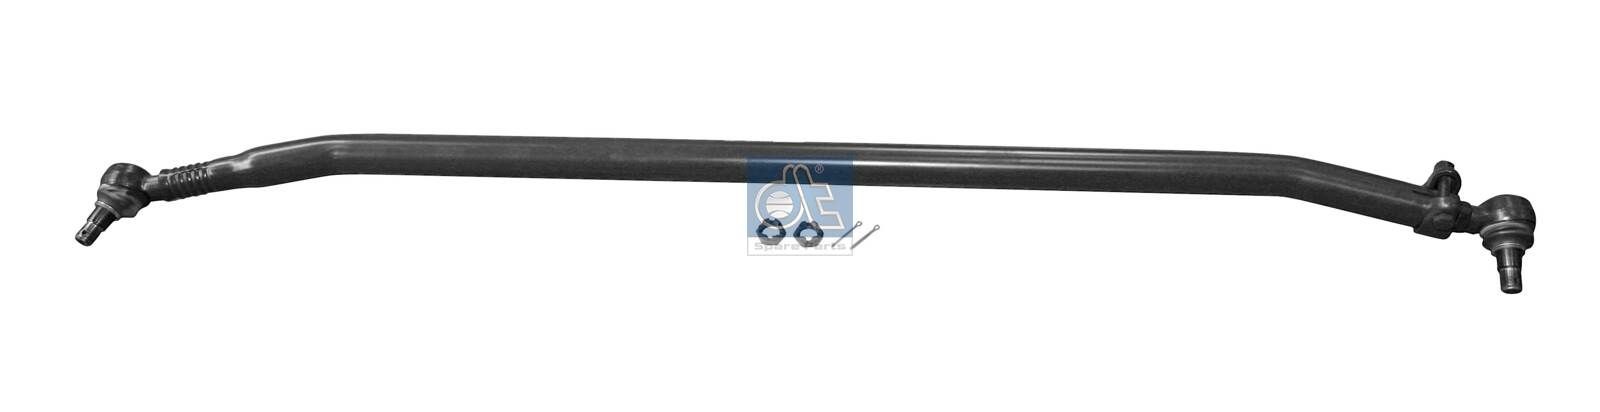 DT Spare Parts 6.53003 Rod Assembly 50 10 439 022